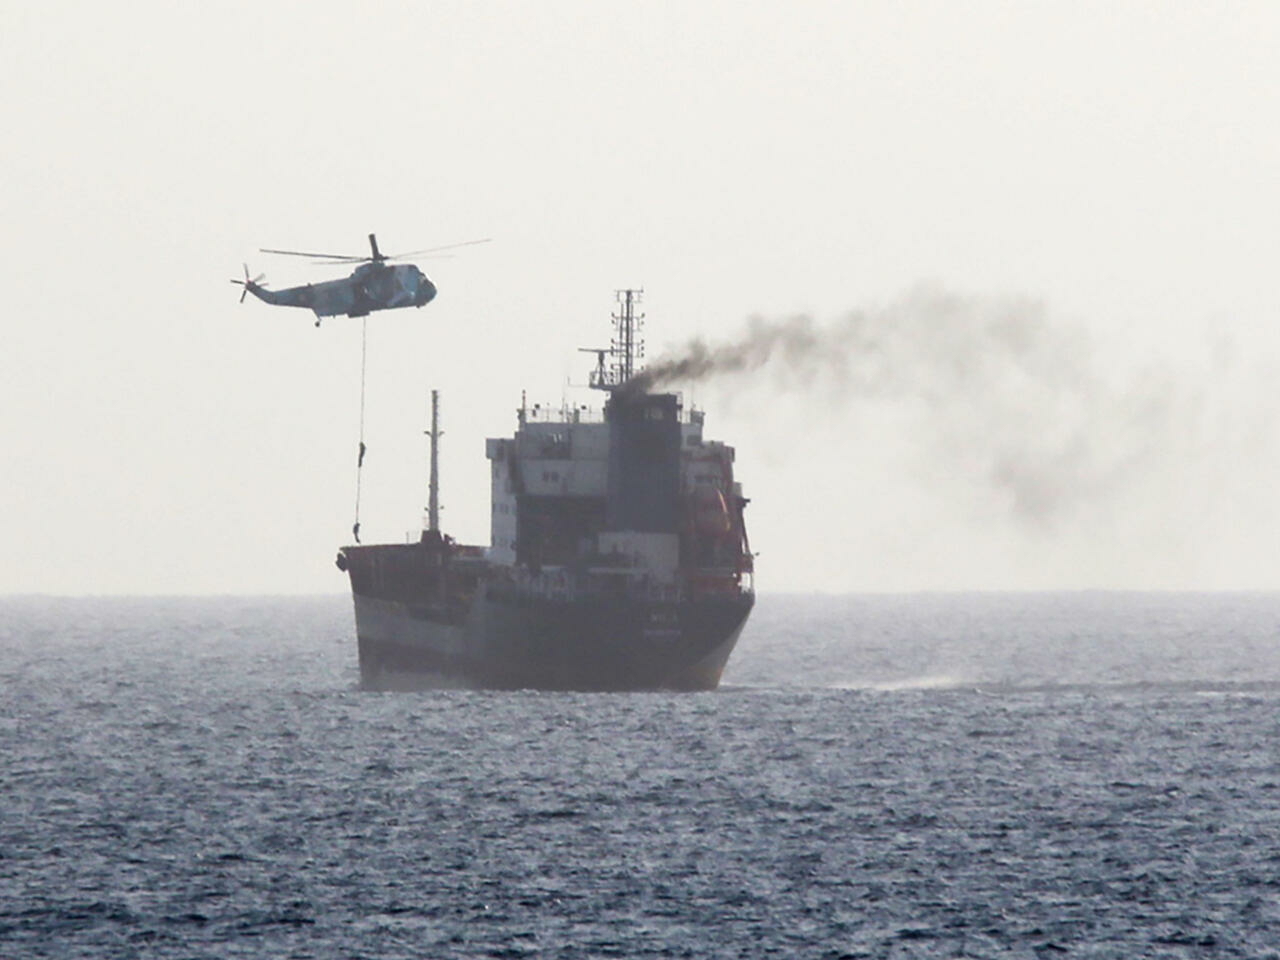 Iranian forces boarding a tanker in international waters in the Gulf of Oman